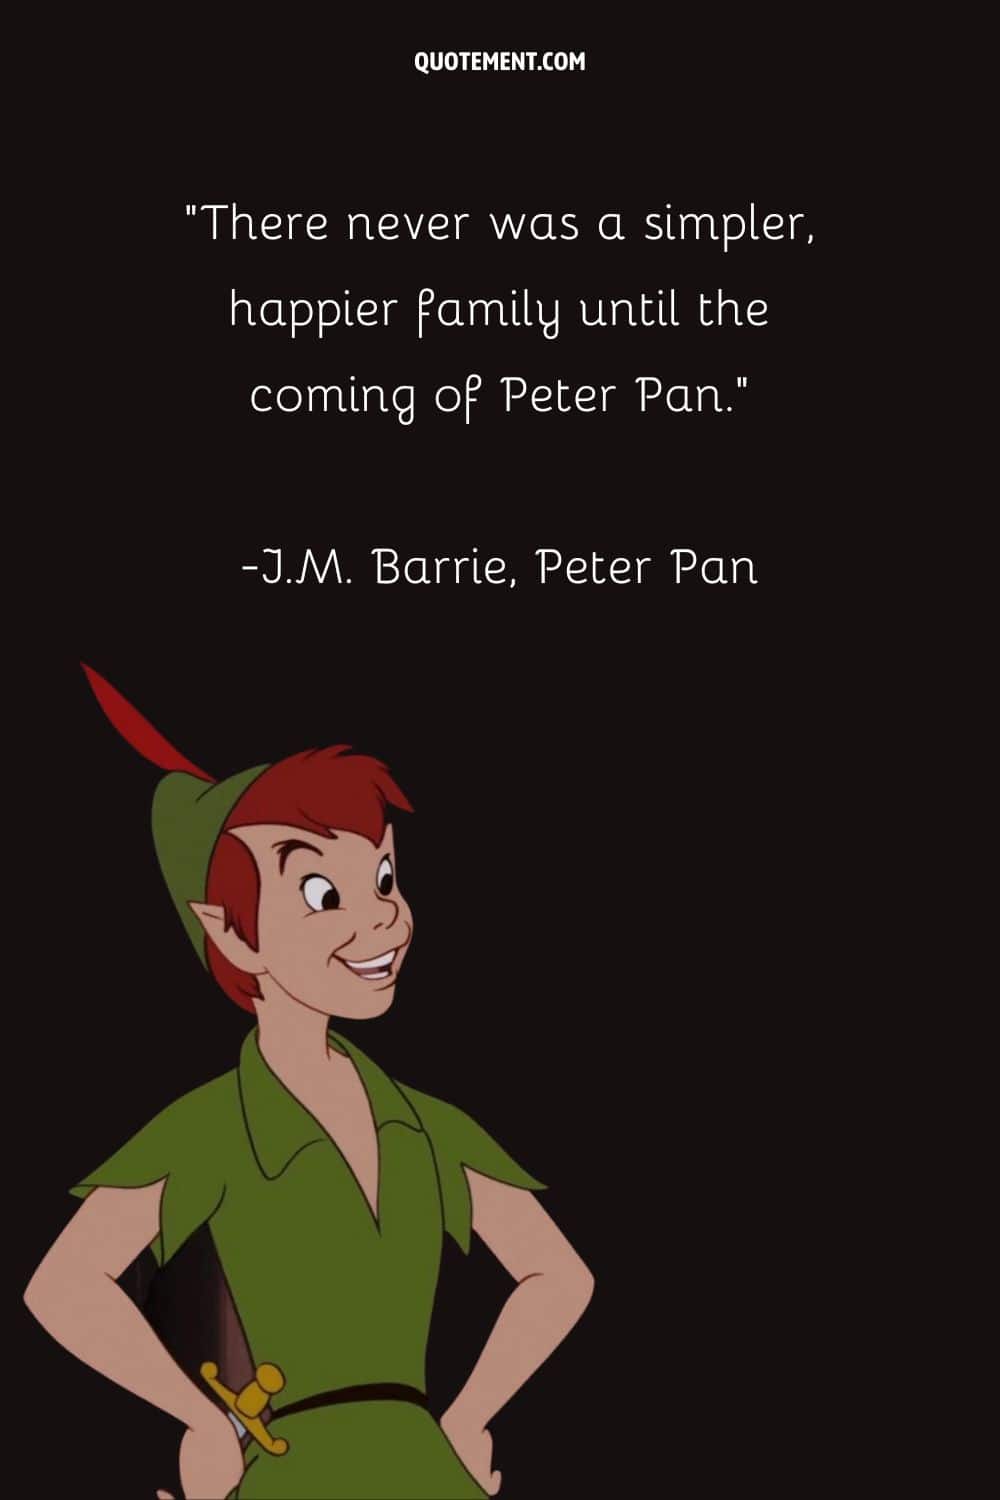 “There never was a simpler, happier family until the coming of Peter Pan.” ― J. M. Barrie, Peter Pan